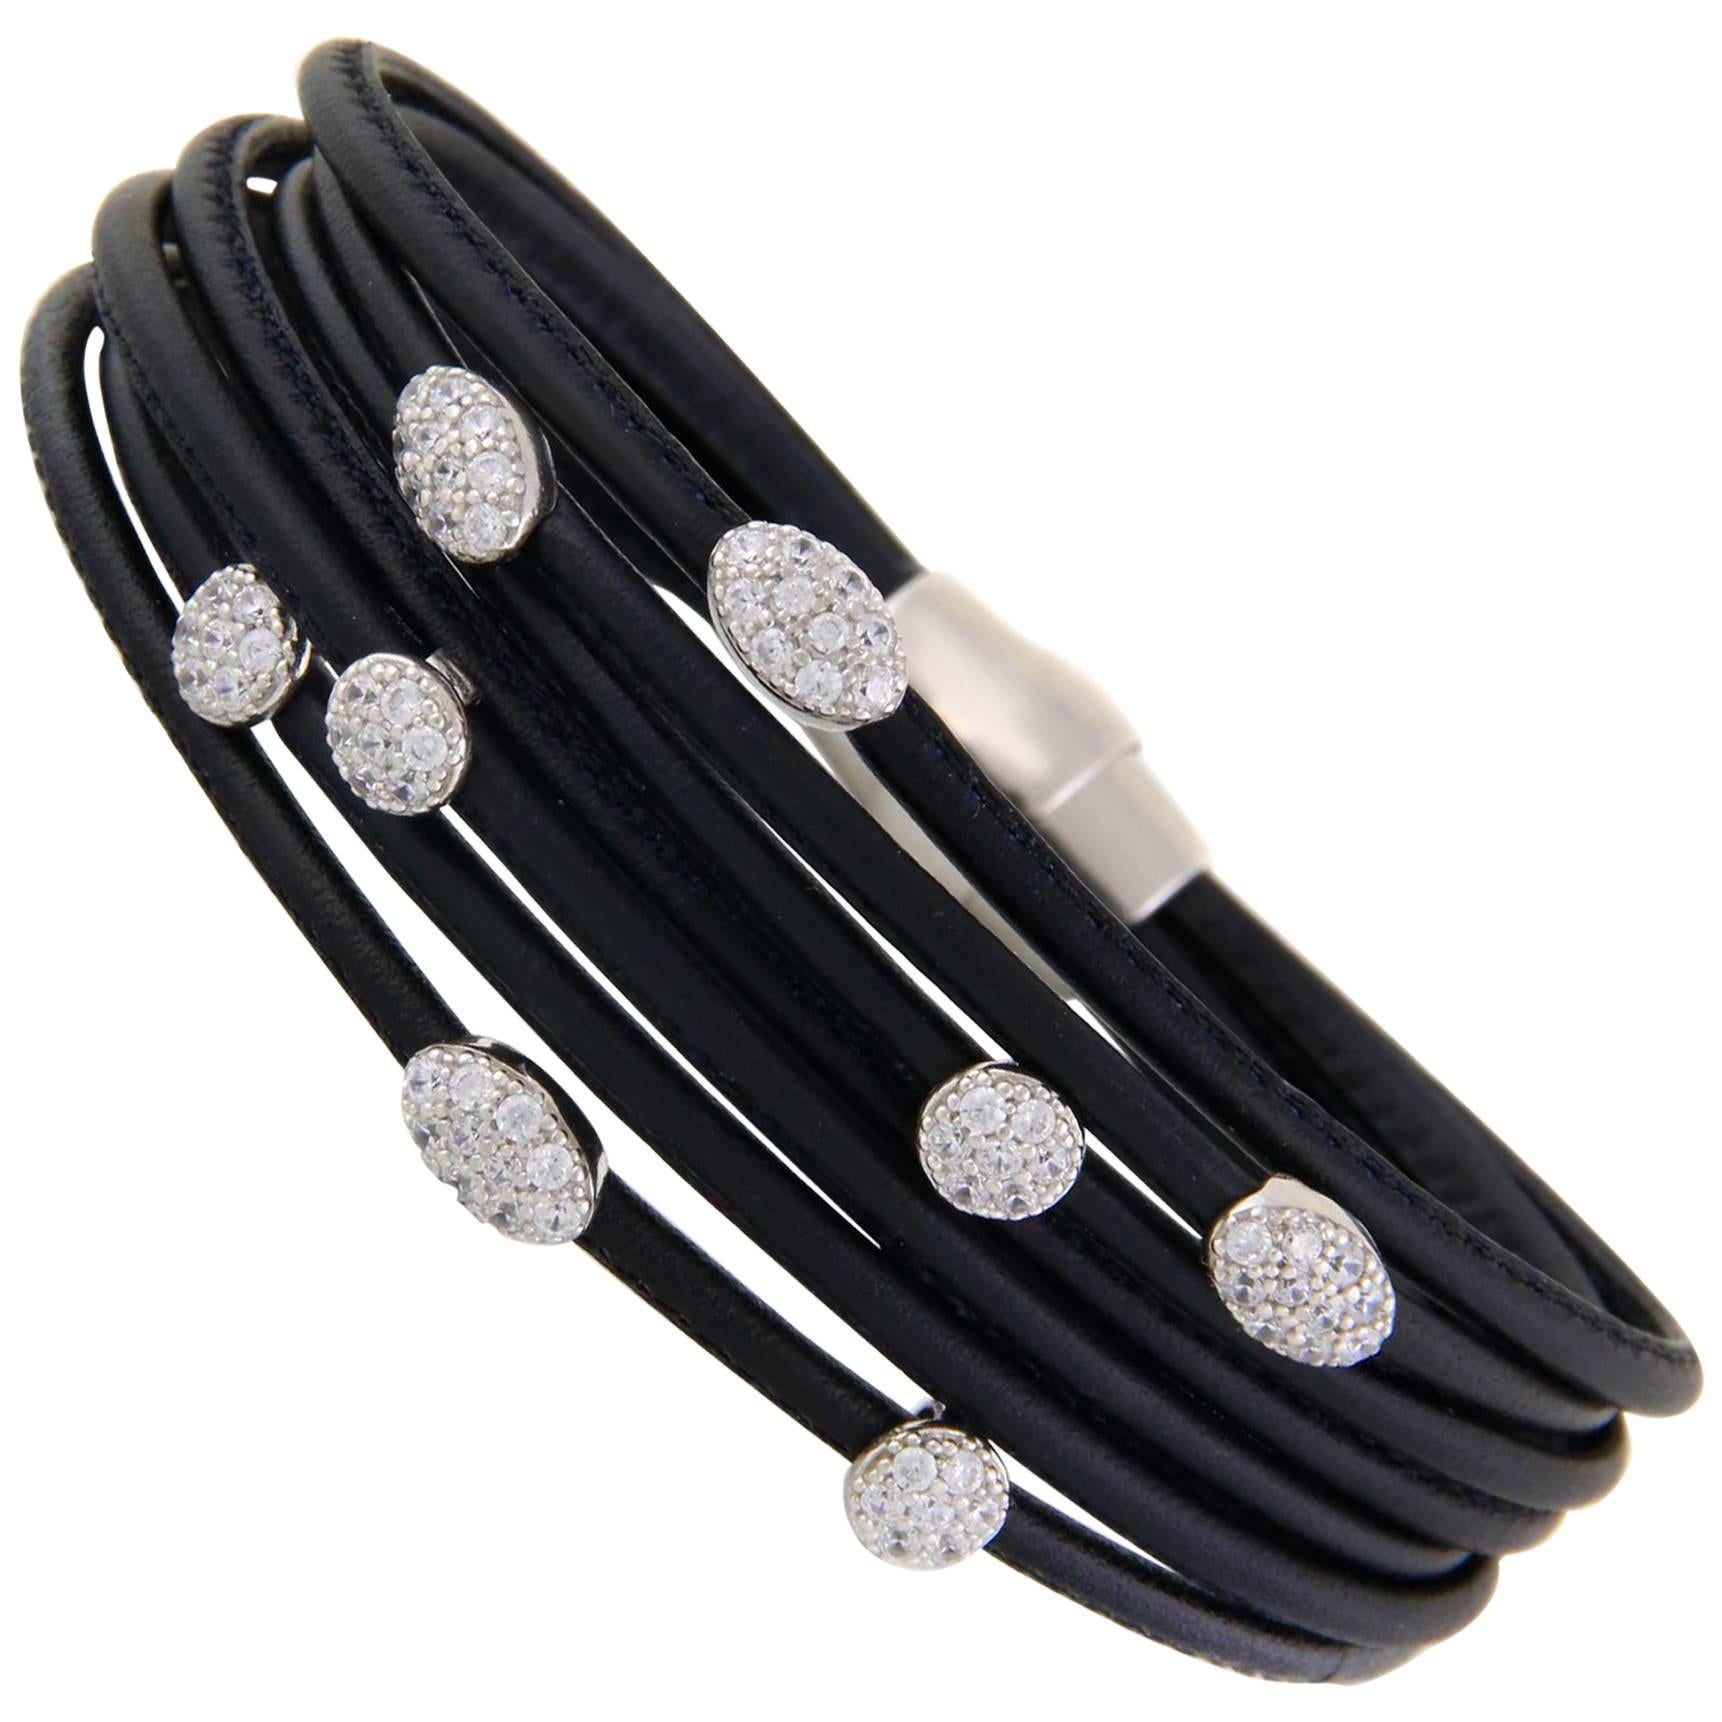 LUCA LORENZINI Black Leather Bracelet made in Italy with Silver Metal Setting, White Sapphires and a Magnetic Clasp.  